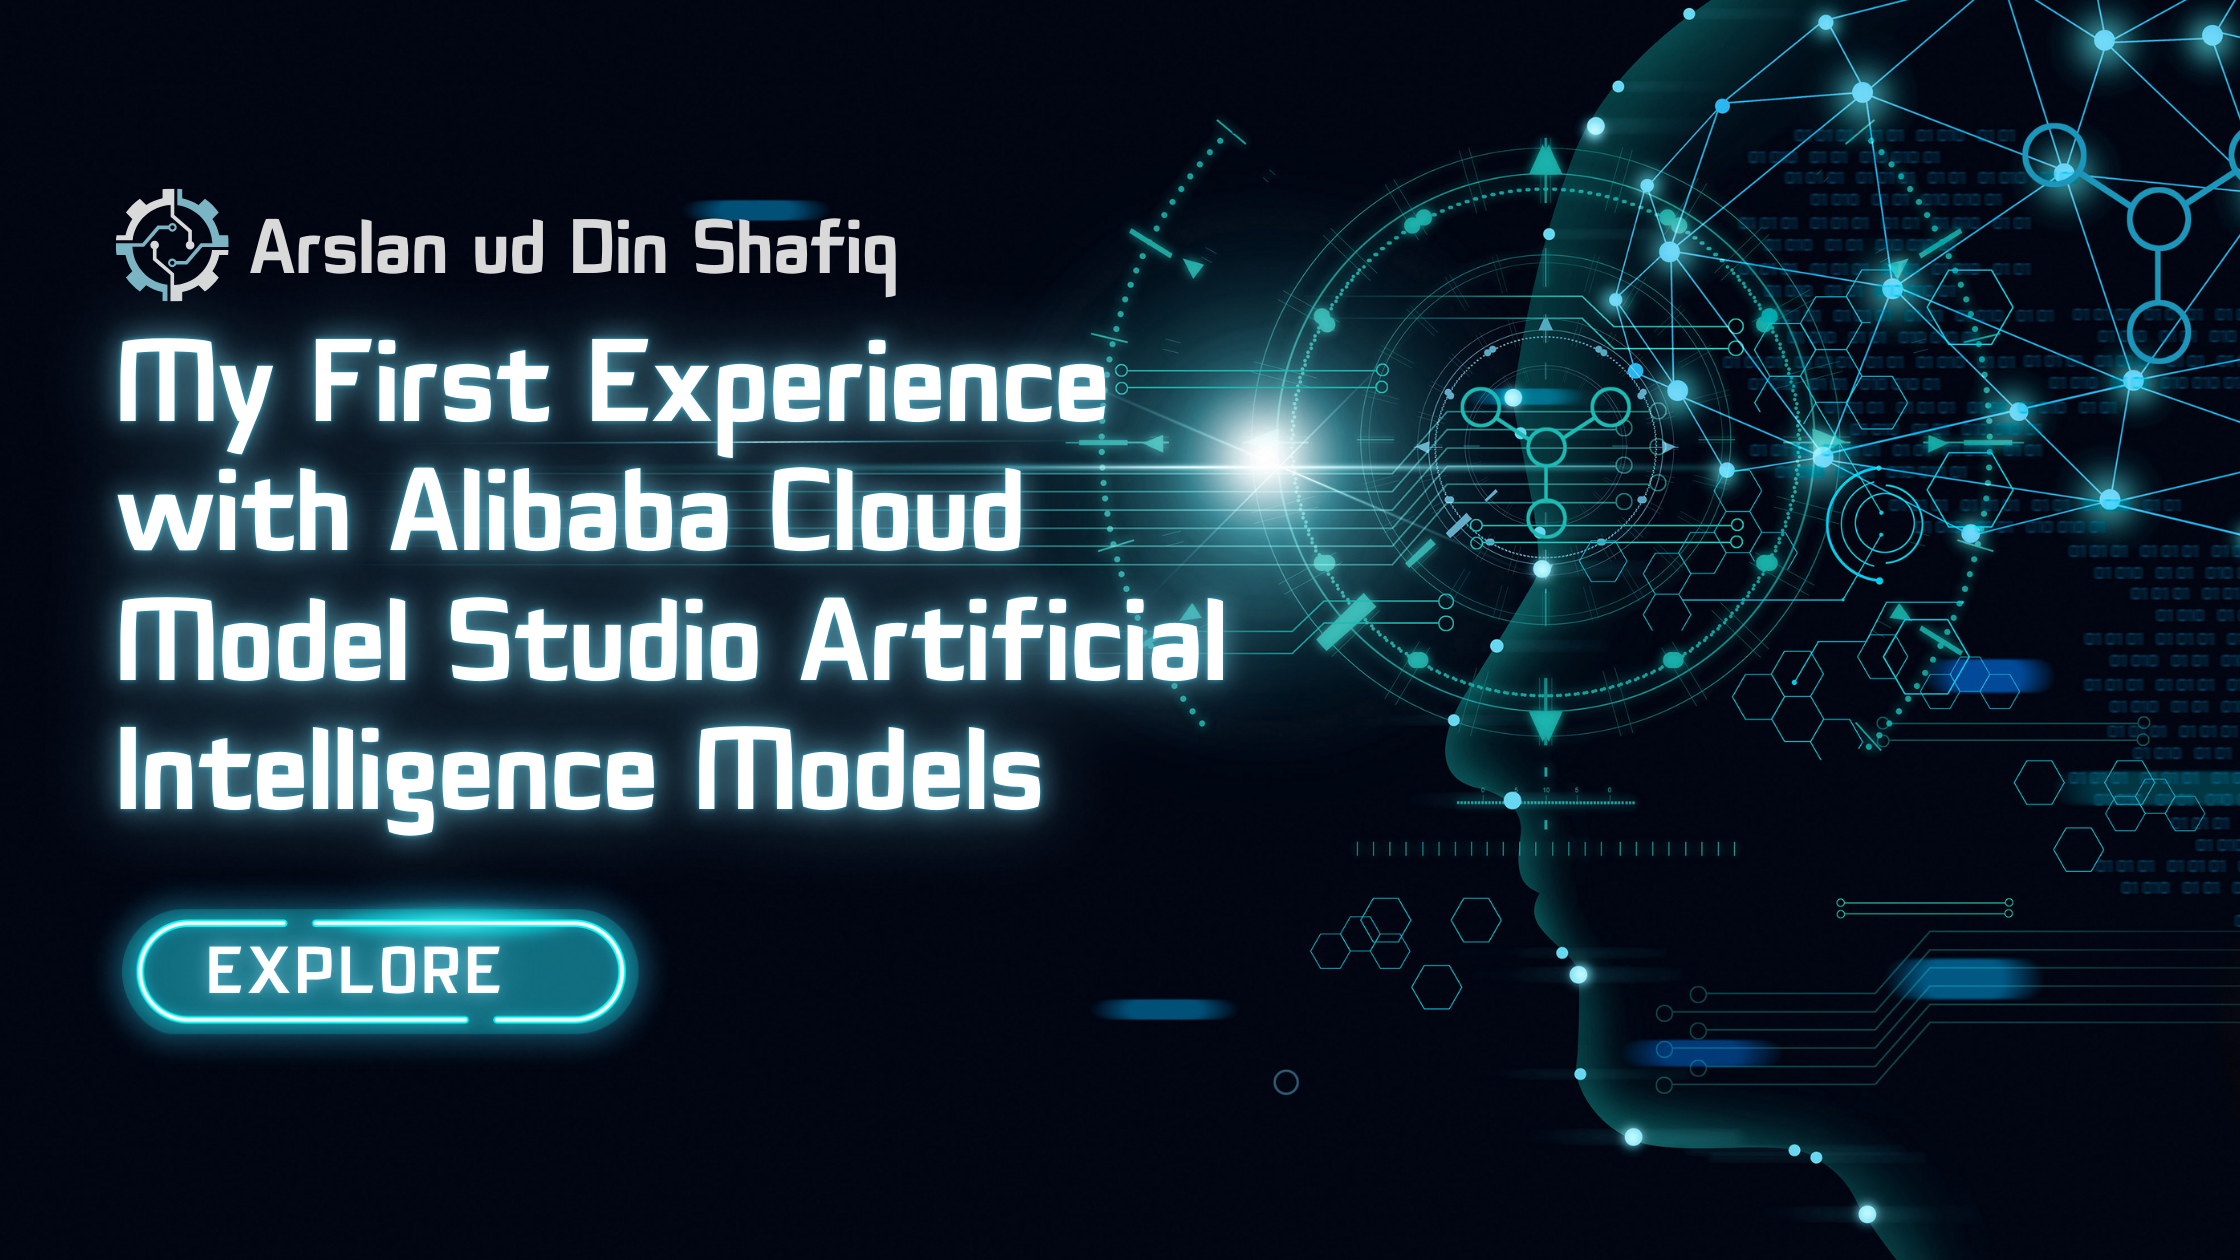 My First Experience with Alibaba Cloud Model Studio Artificial Intelligence Models